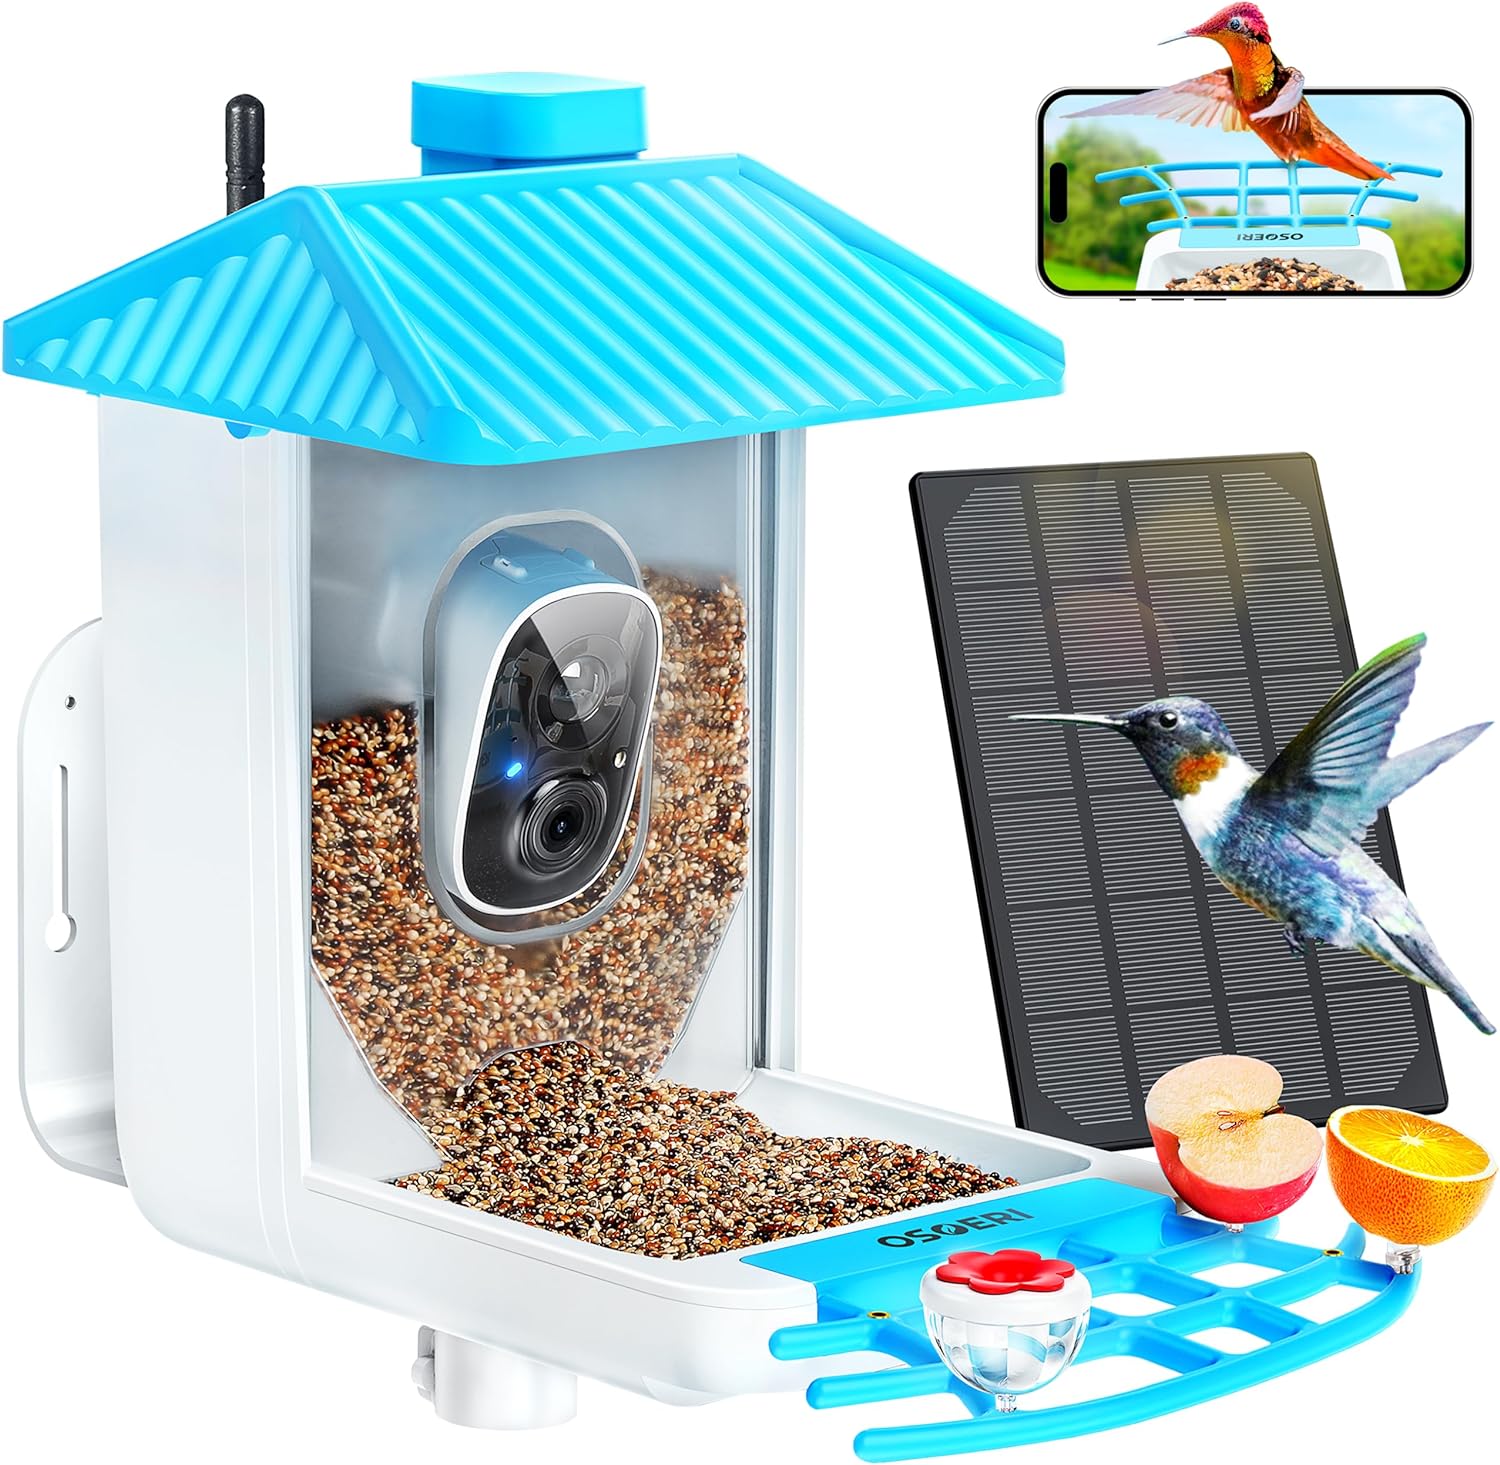 Snag Your Exclusive 1080P HD Bird Watching Camera - Limited-Time Discount!